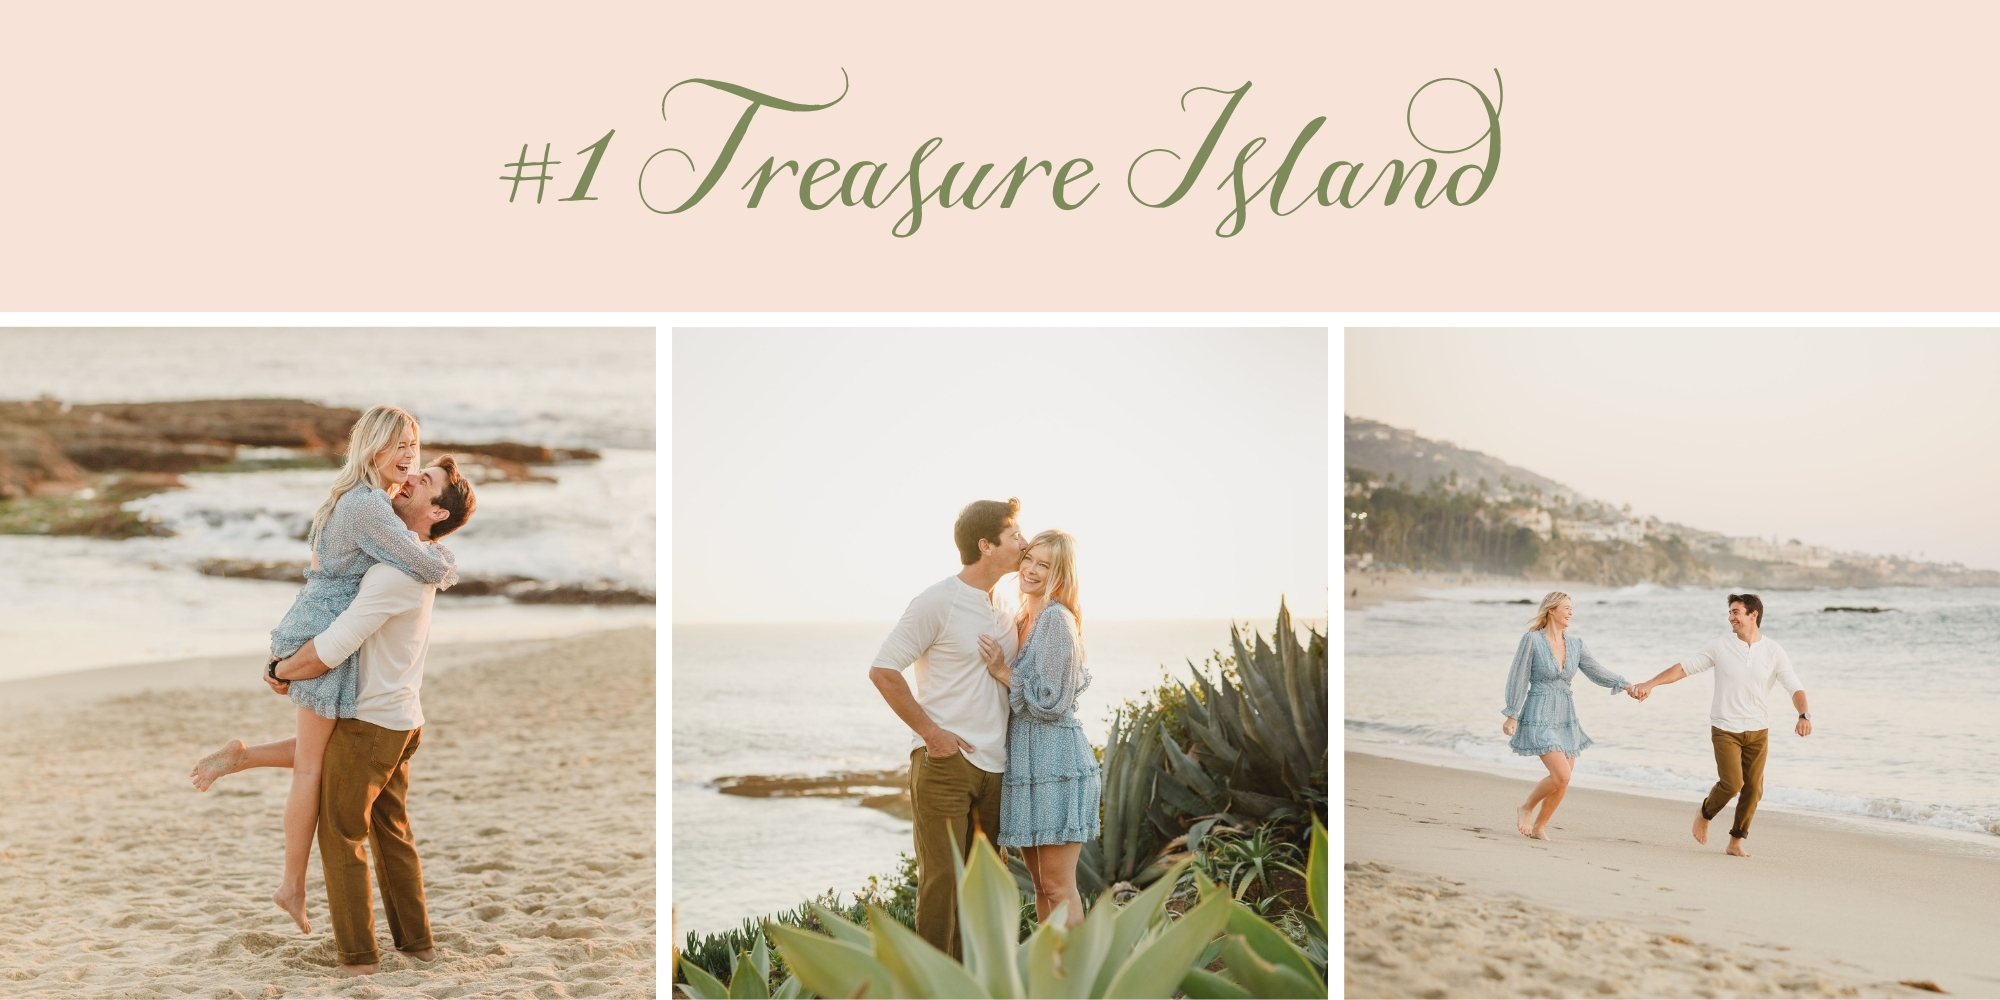 Top Engagement Photo Locations in Southern California